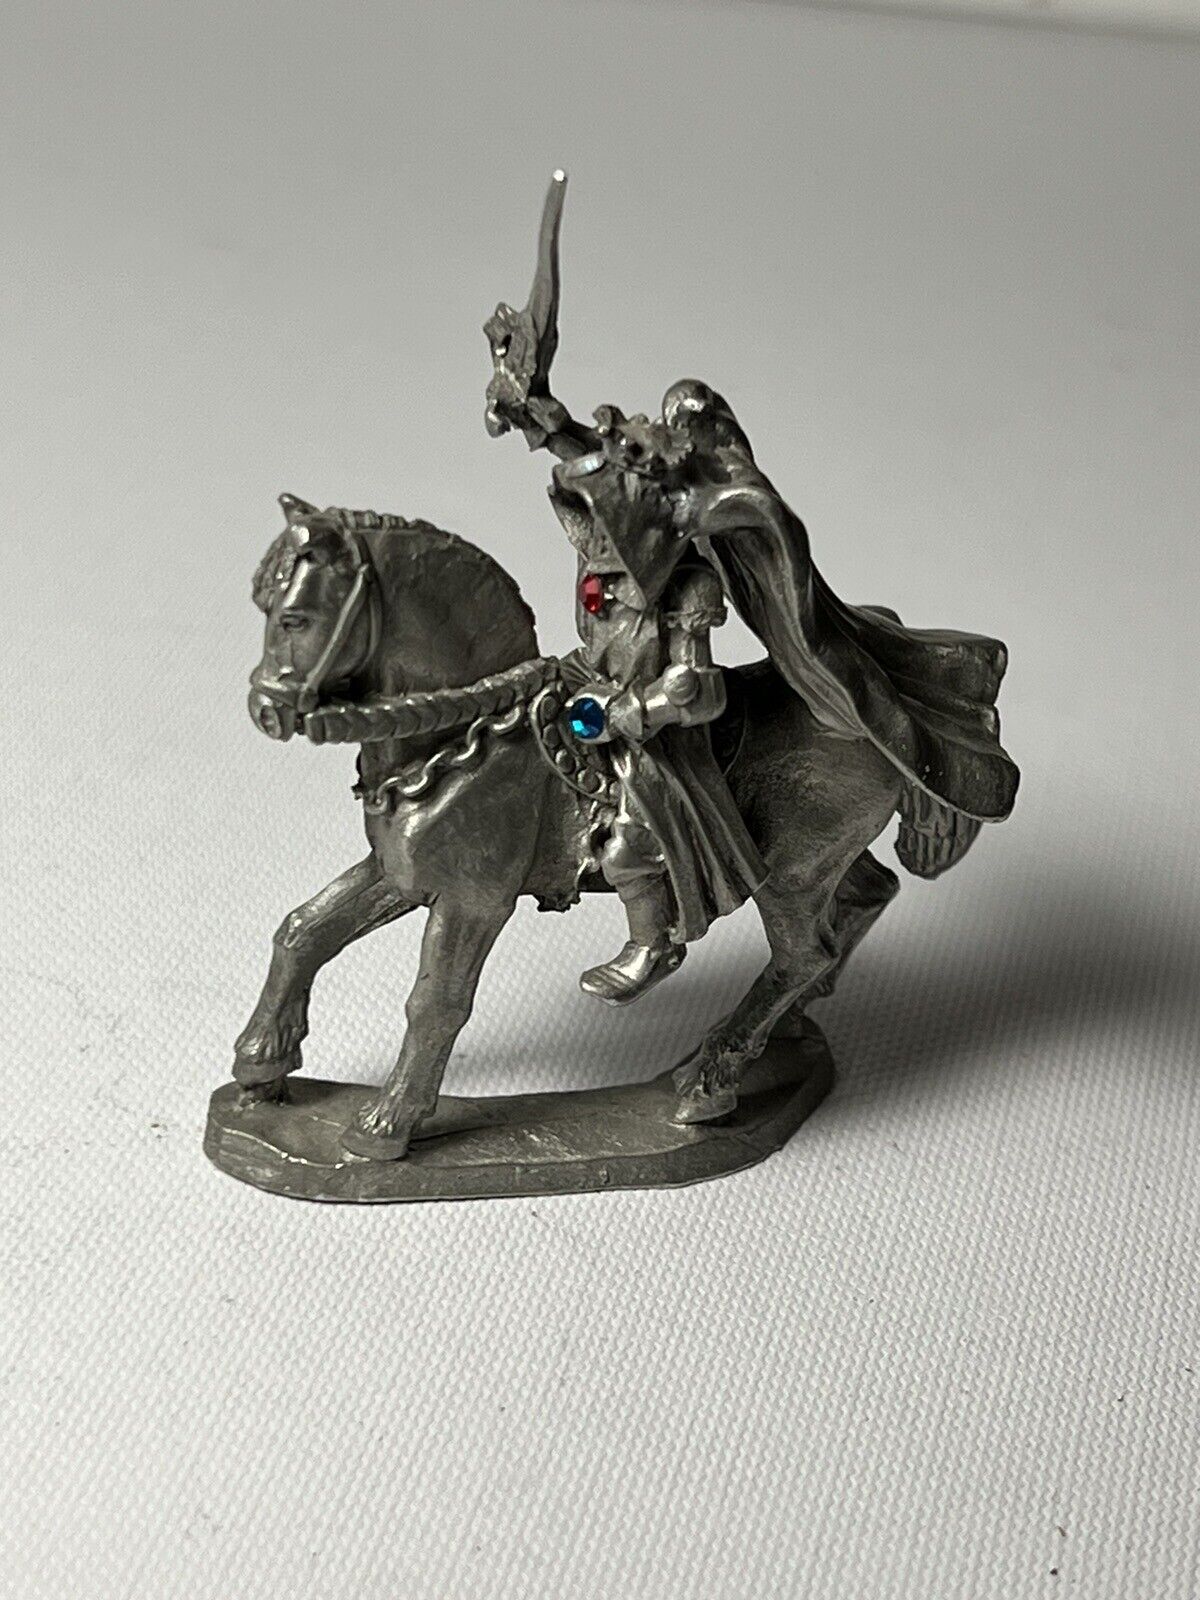 VTG 86 Ral Partha Pewter Knight On Horse Mini Statue D&D Fantasy PP 231 Figurine